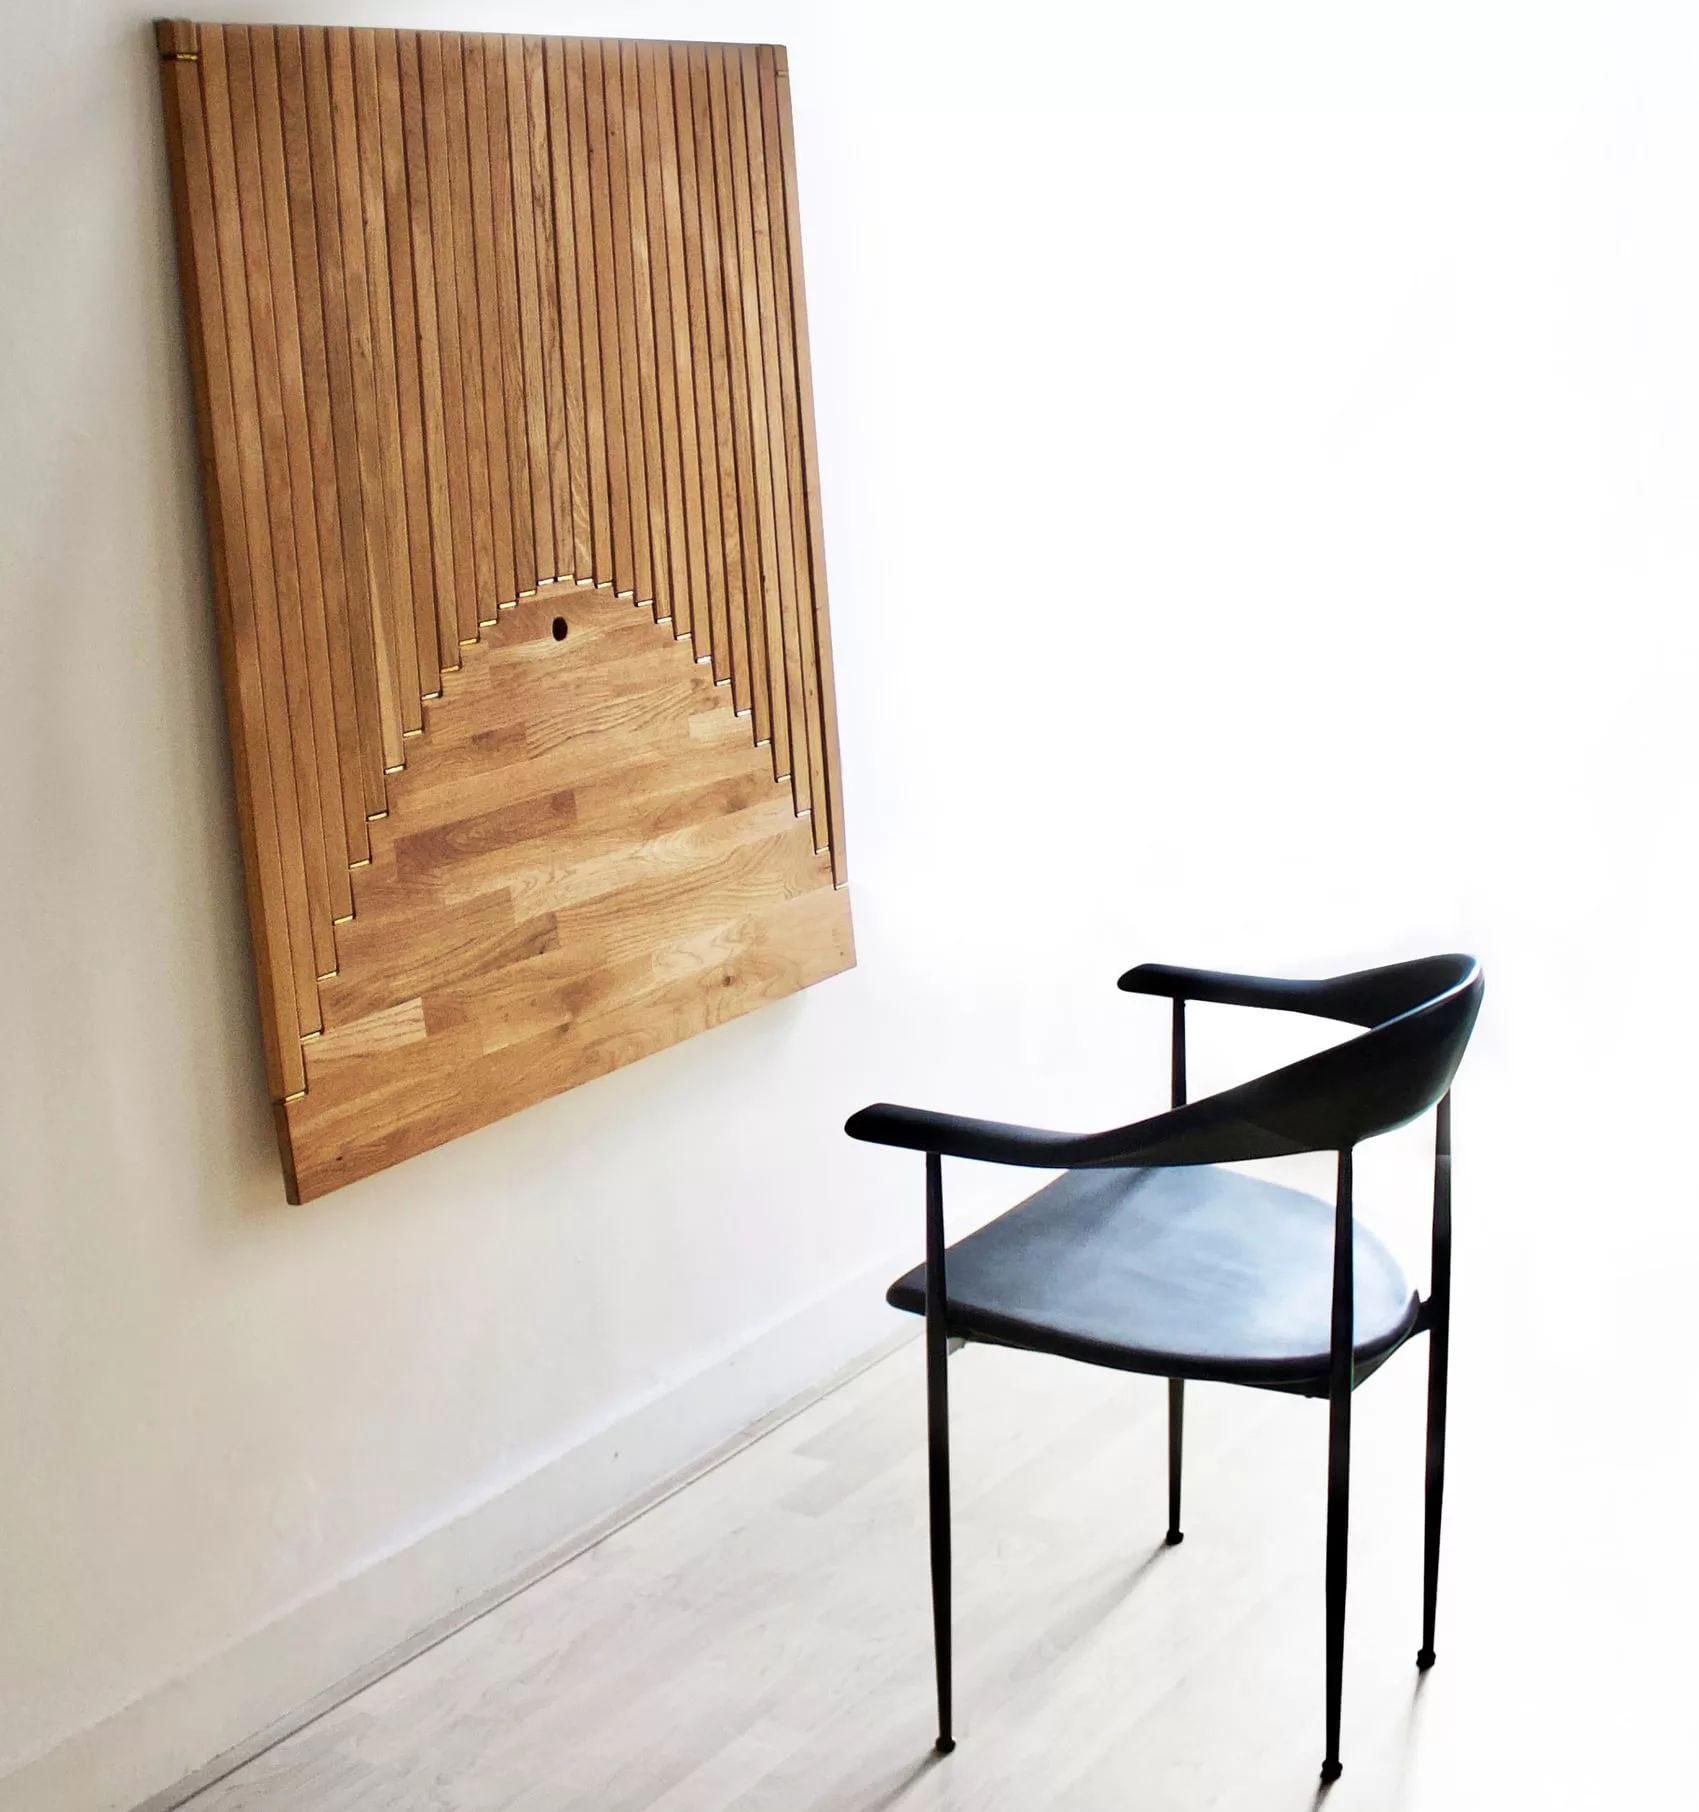 a chair sitting in front of a wooden table